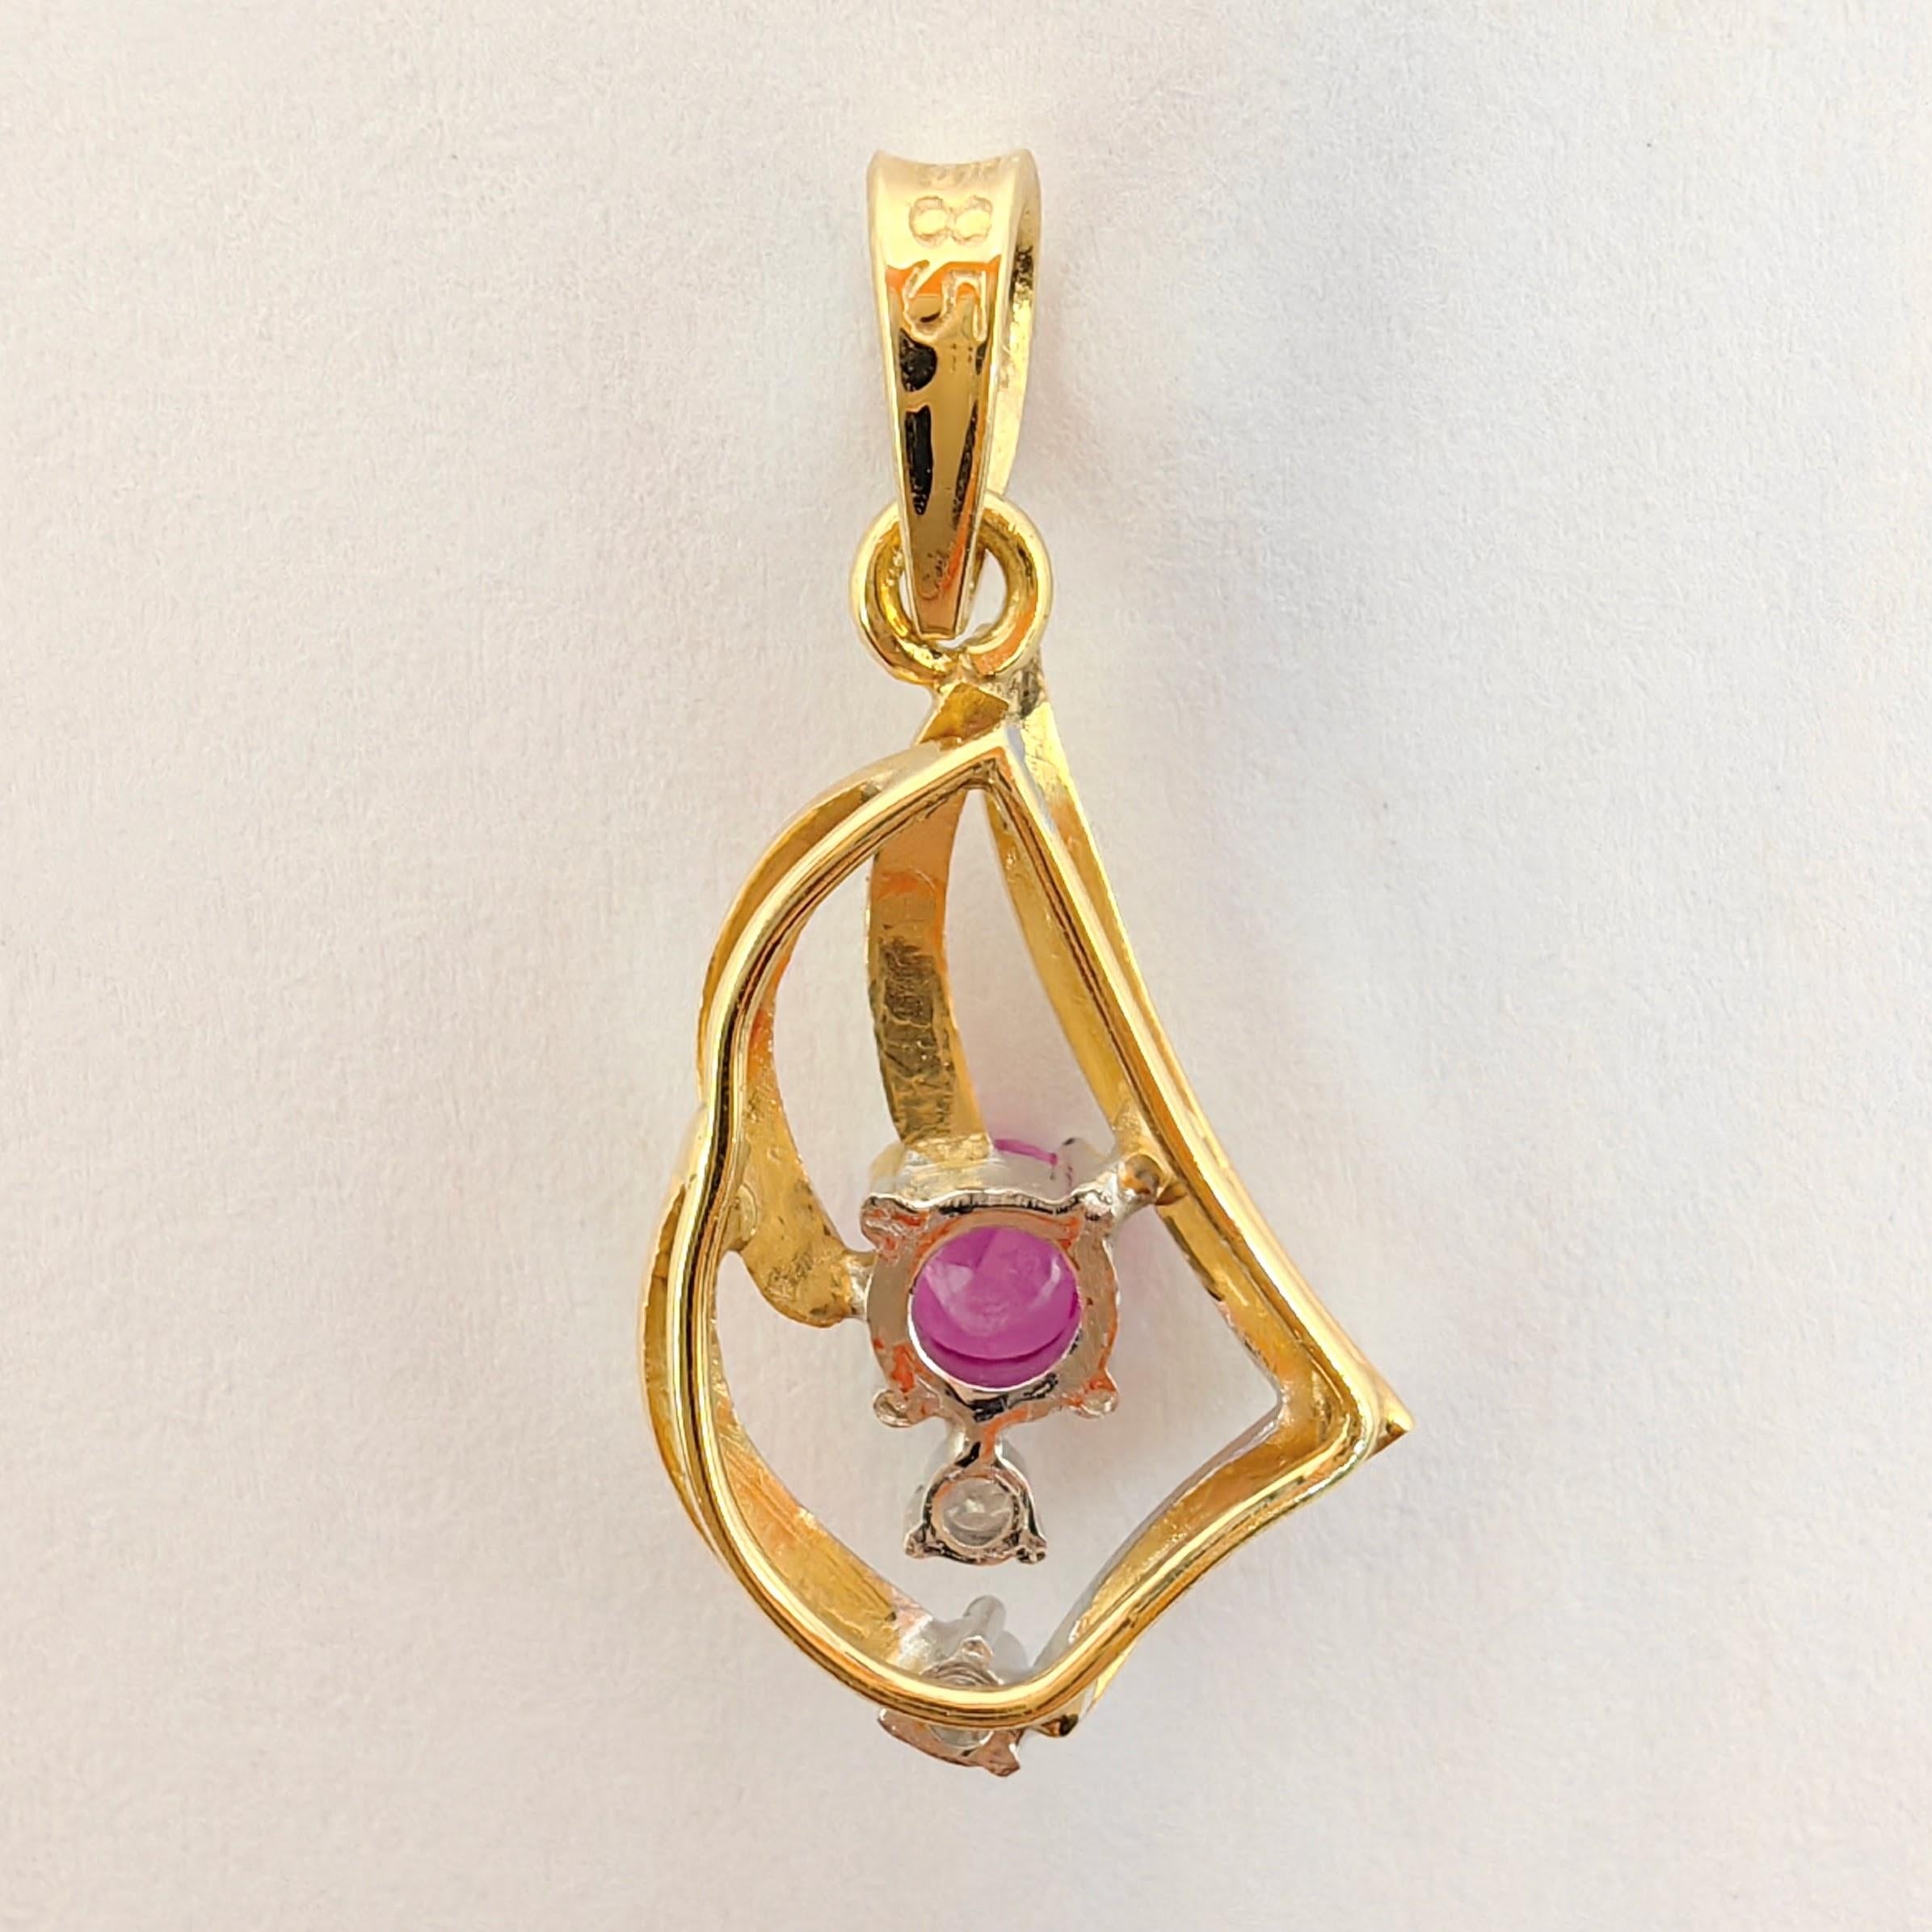 Contemporary Vintage Natural Pink Sapphire Diamond Necklace Pendant in 14K Yellow Gold